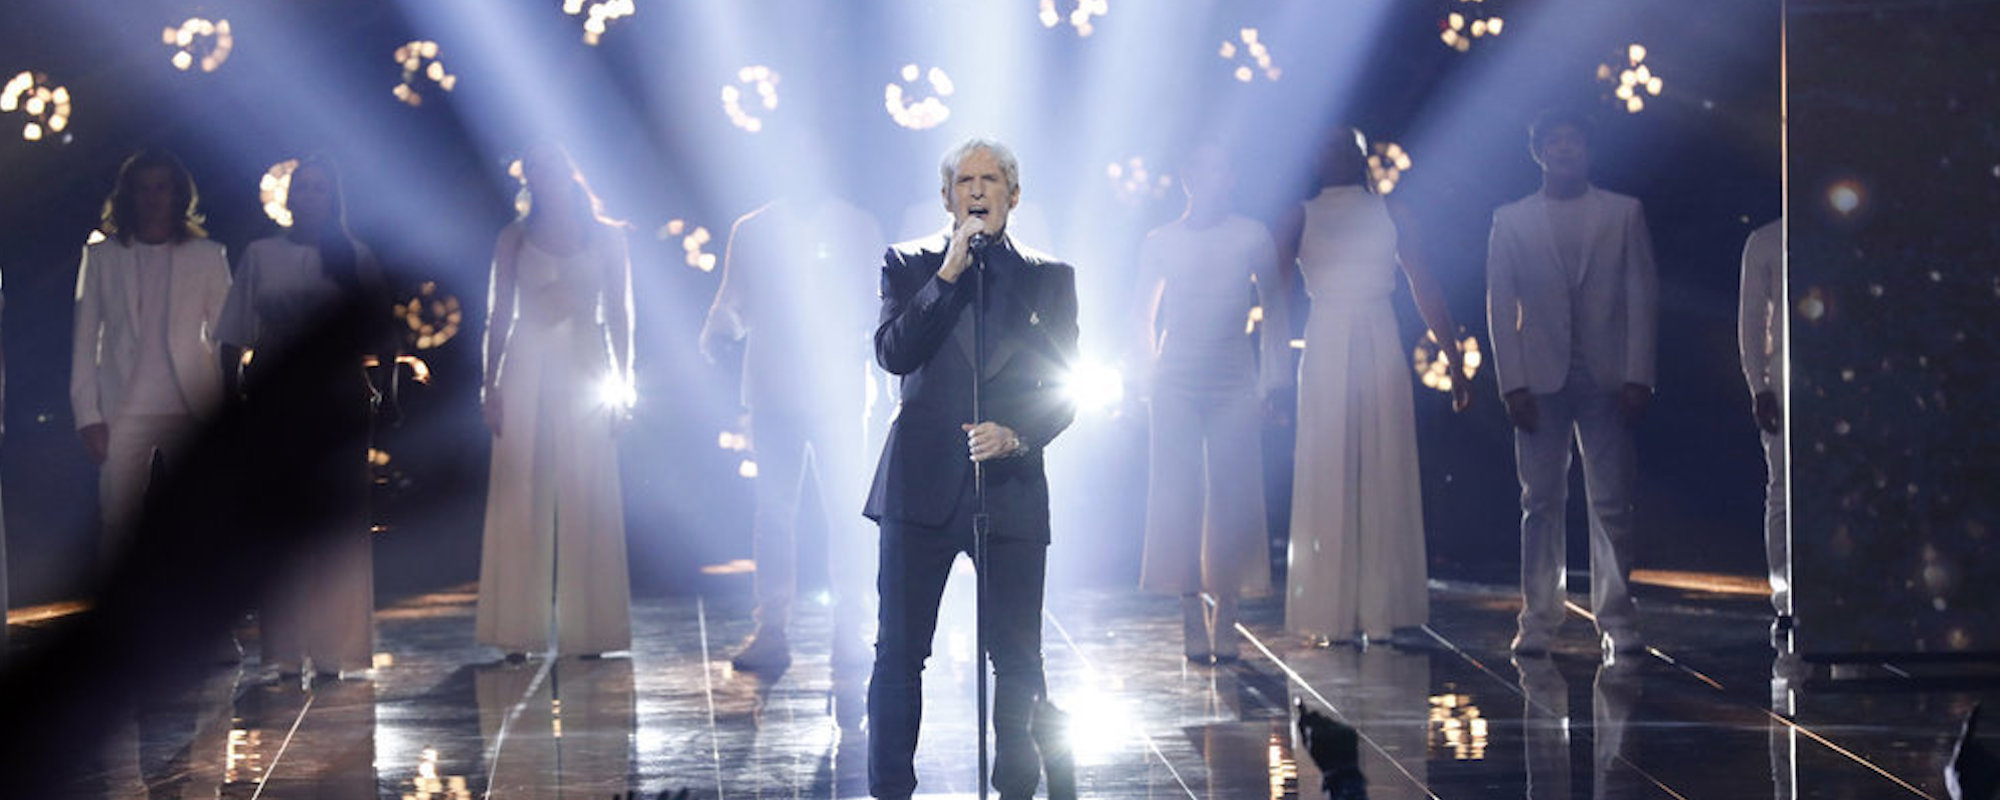 Michael Bolton Releases Video for ‘American Song Contest’ Song “Beautiful World”